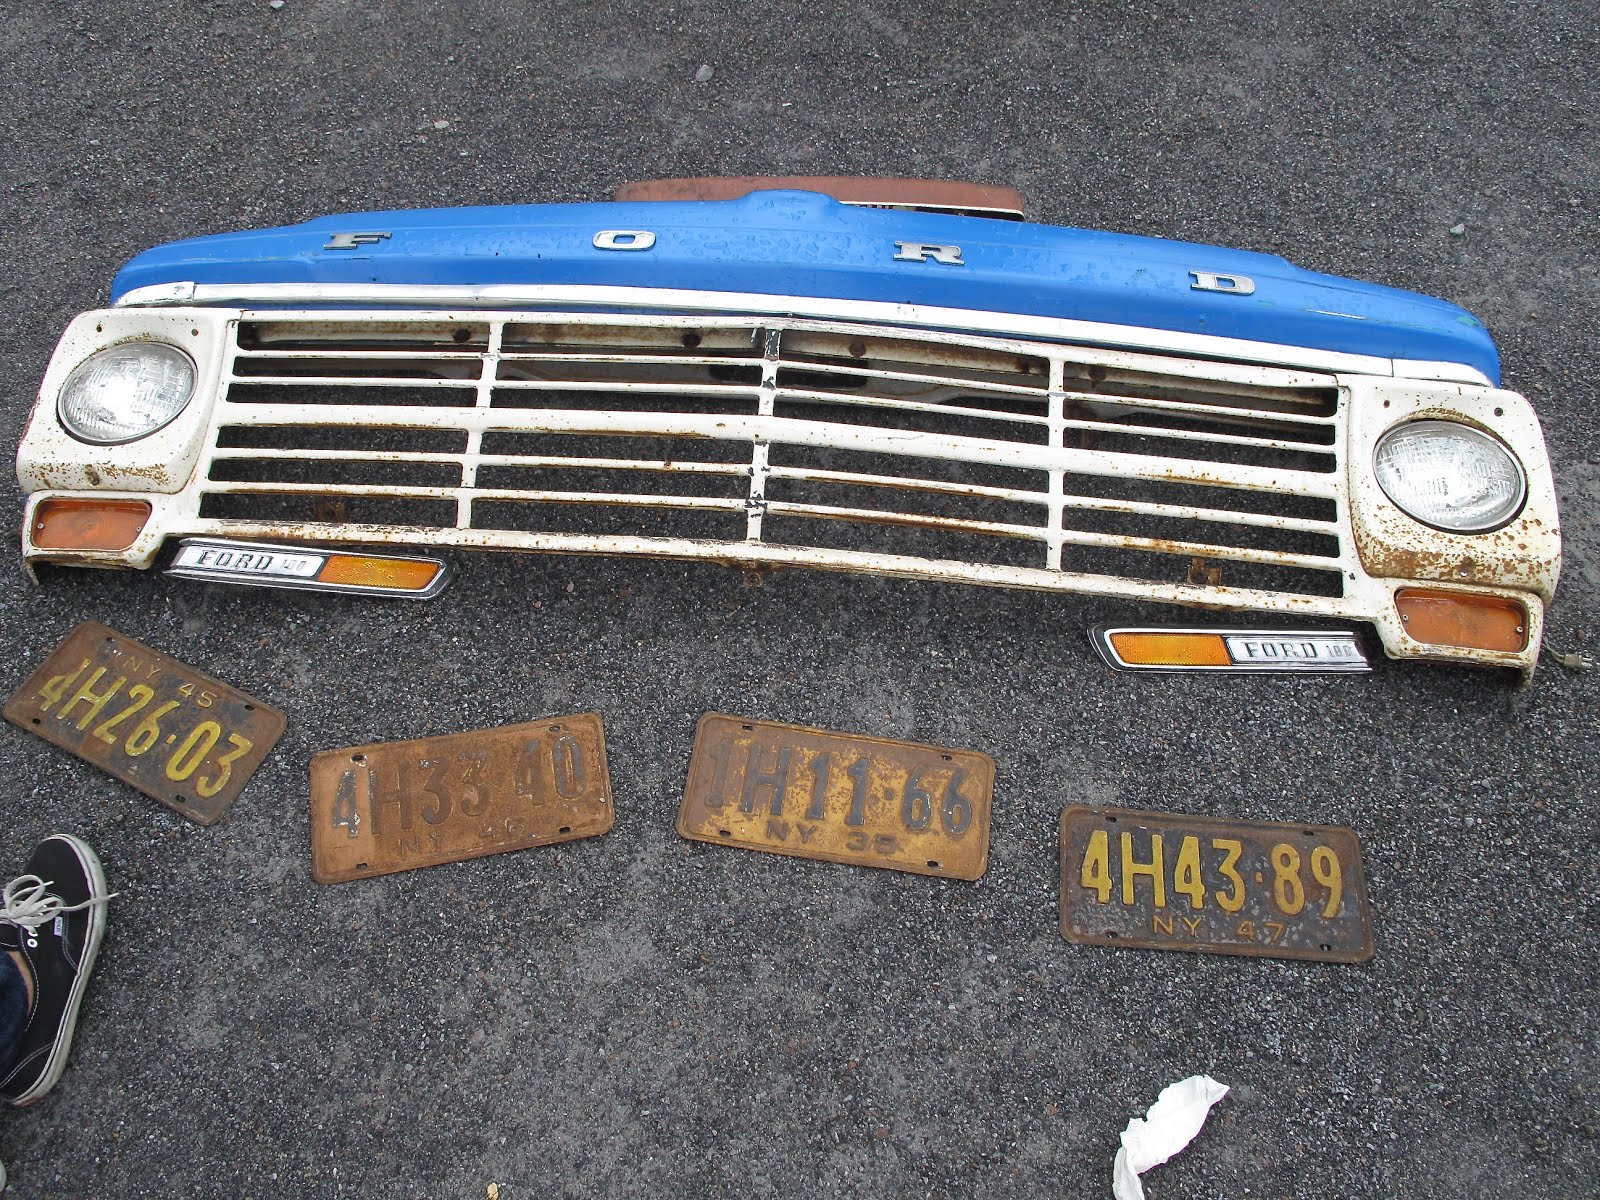 Brooklyn Flea Market features grill of old-timer Ford F-150.